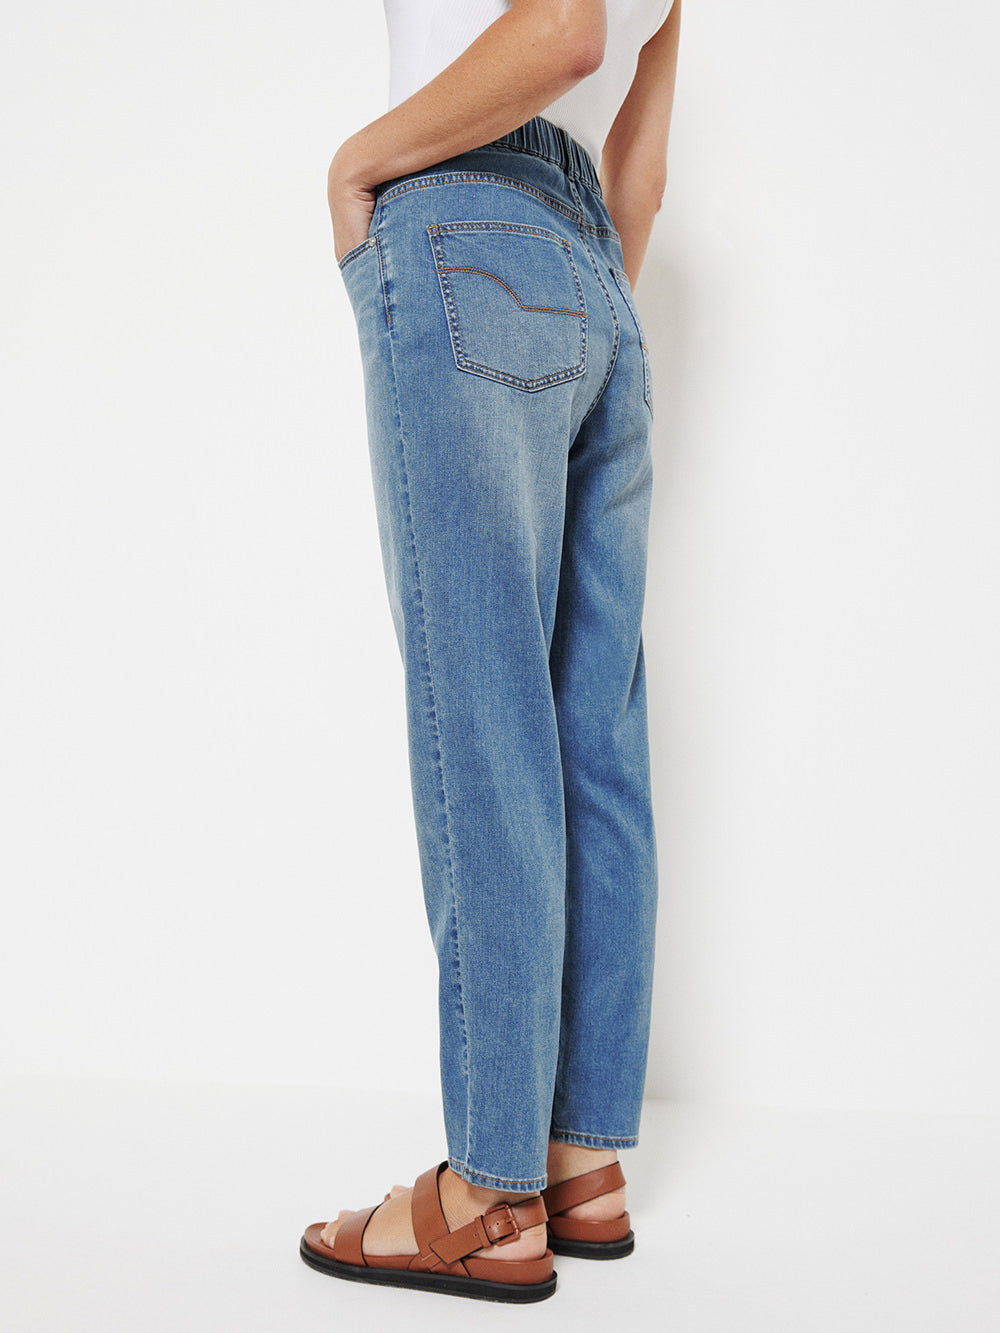 The Soft Stretch Casual Pant